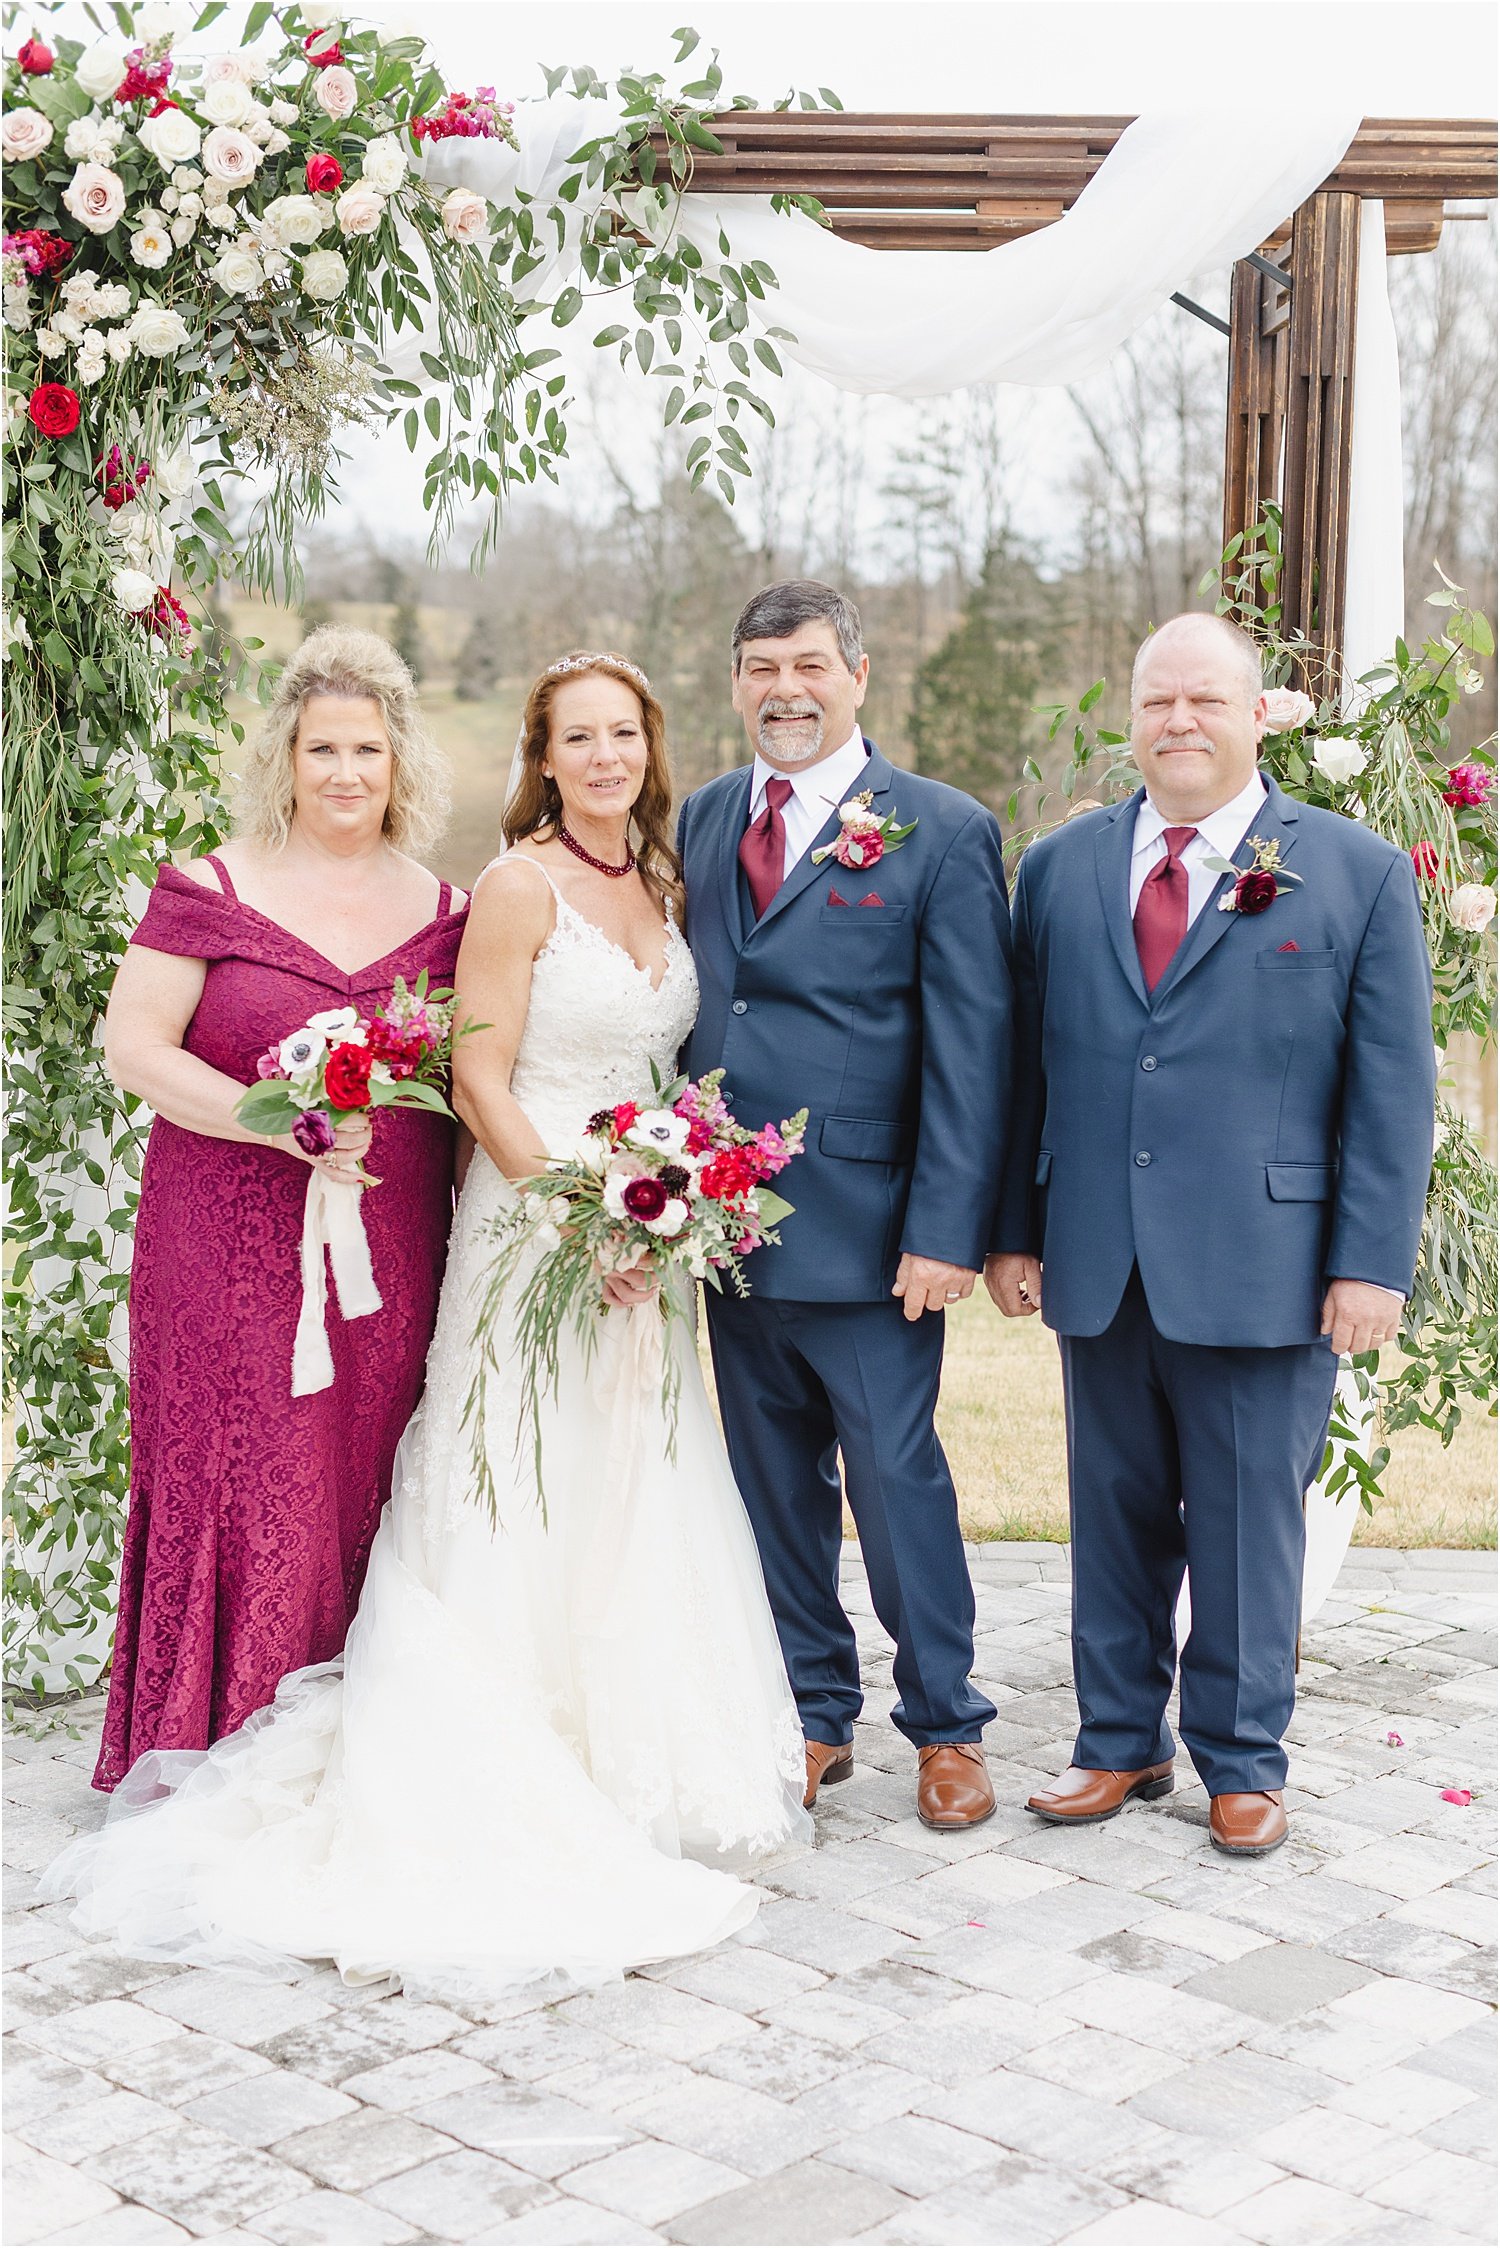 Photo of Bride and Groom with Their Maid of Honor and Best Man